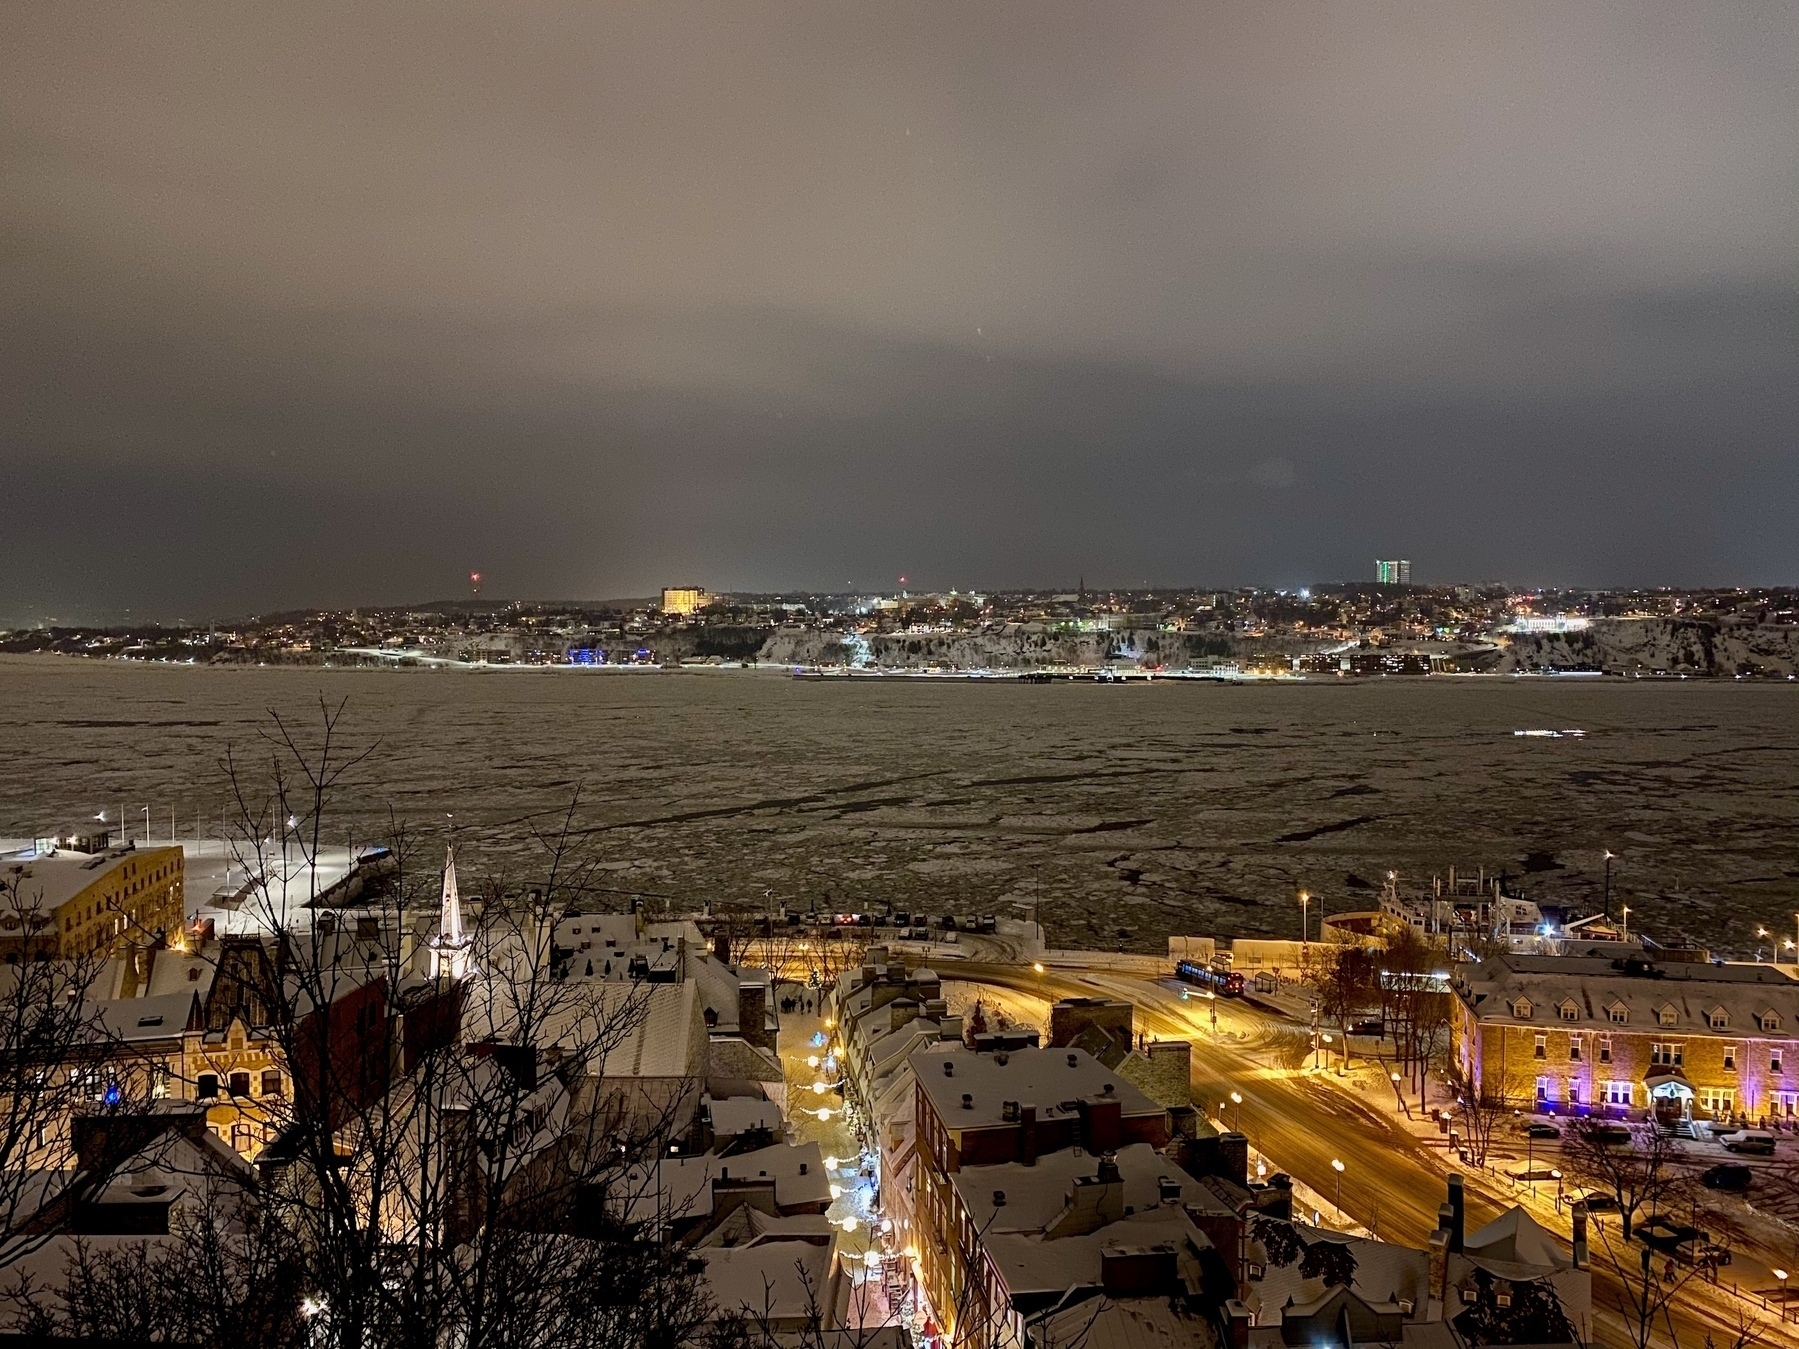 View of the St. Lawrence River, with ice chunks occupying most of the surface, at night, with houses covered in snow and streets with lights at the bottom of the picture. On the upper part of the picture, across the river, lights can be seen up and down a bluff, with a few well-light buildings prominent in the cloudy night sky.